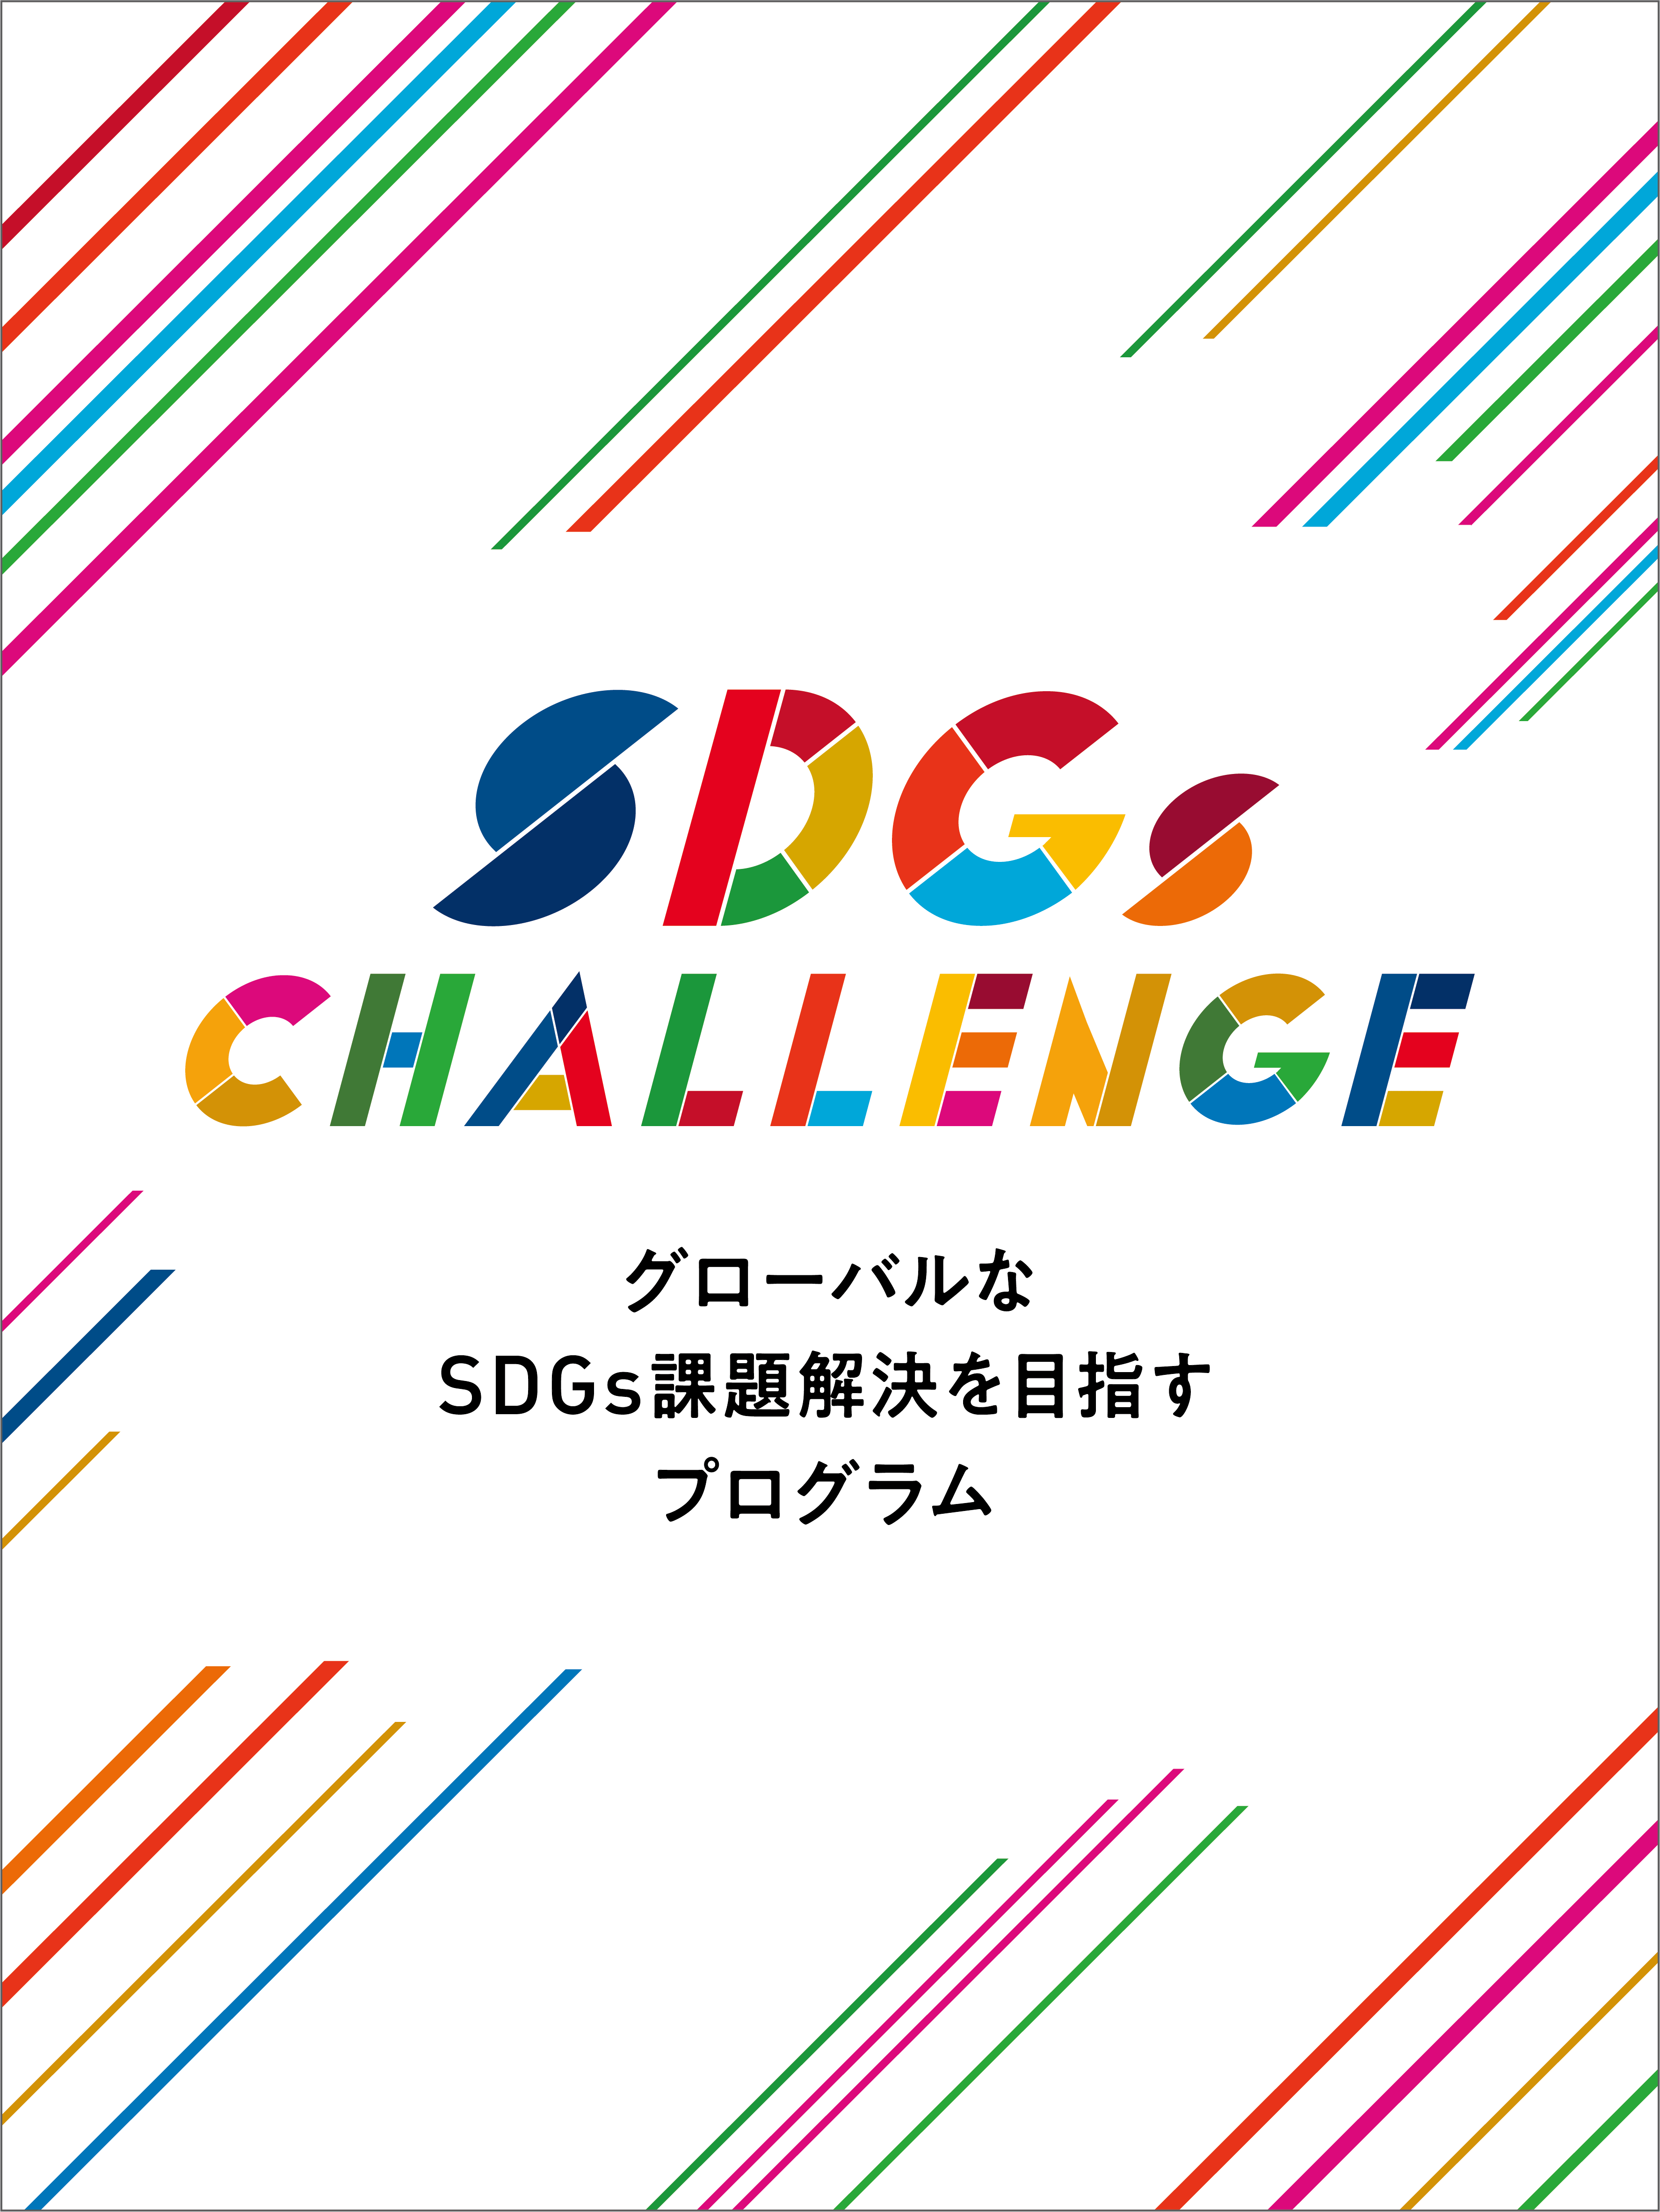 SDGs Day for Global Challengers